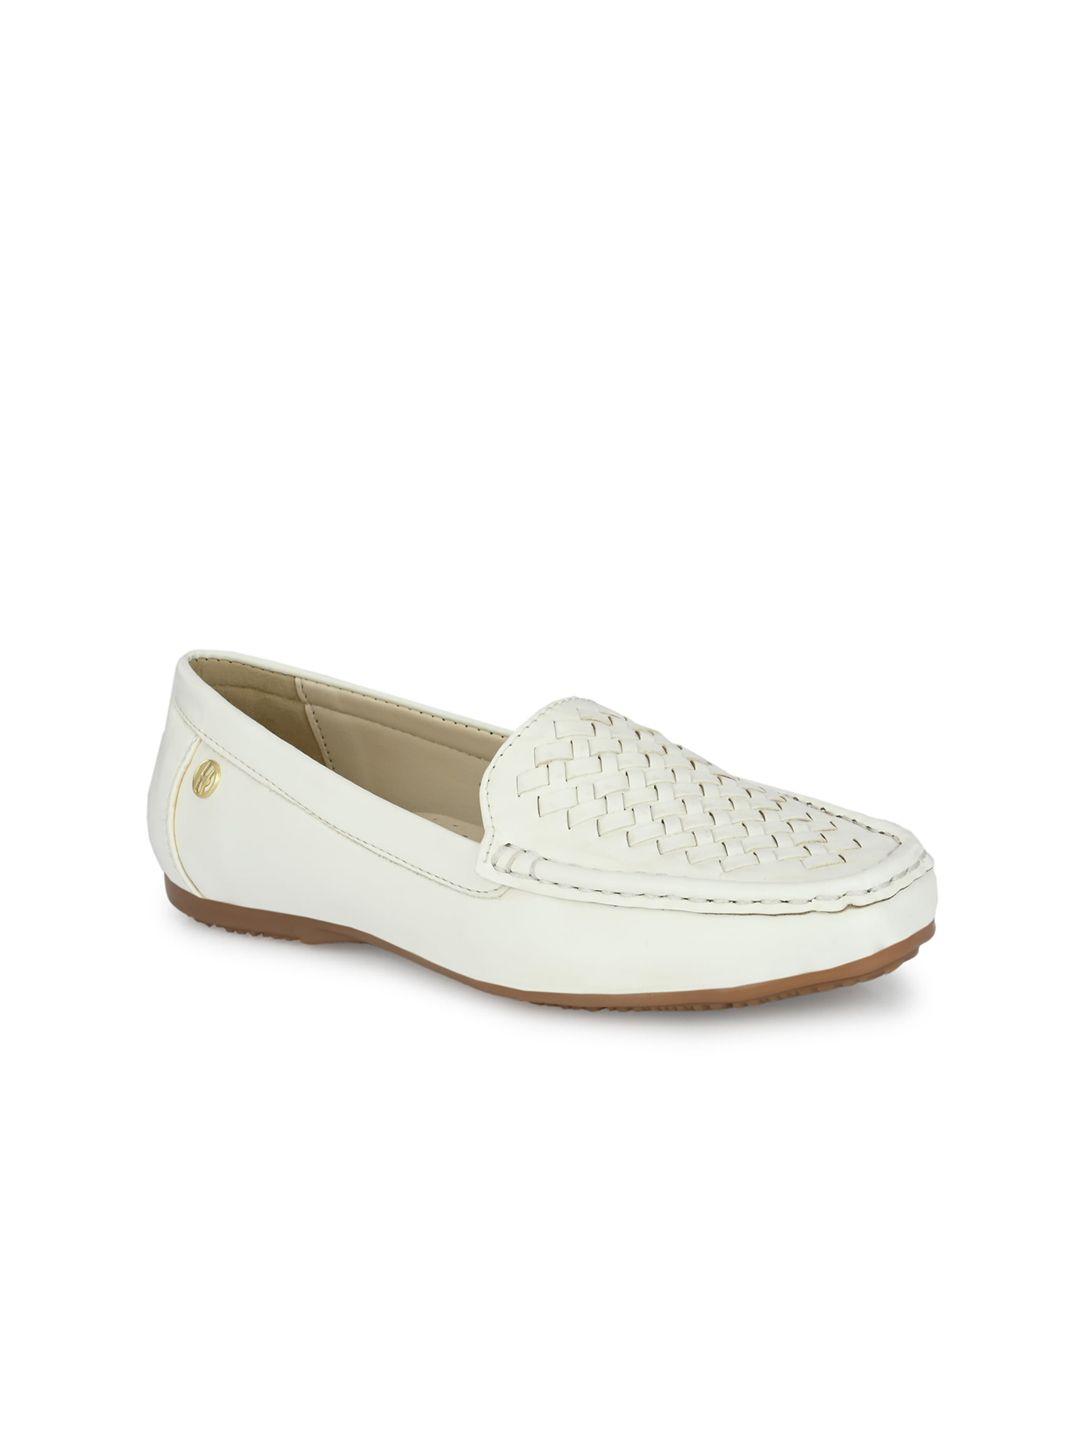 ELLE Women White Perforations Loafers